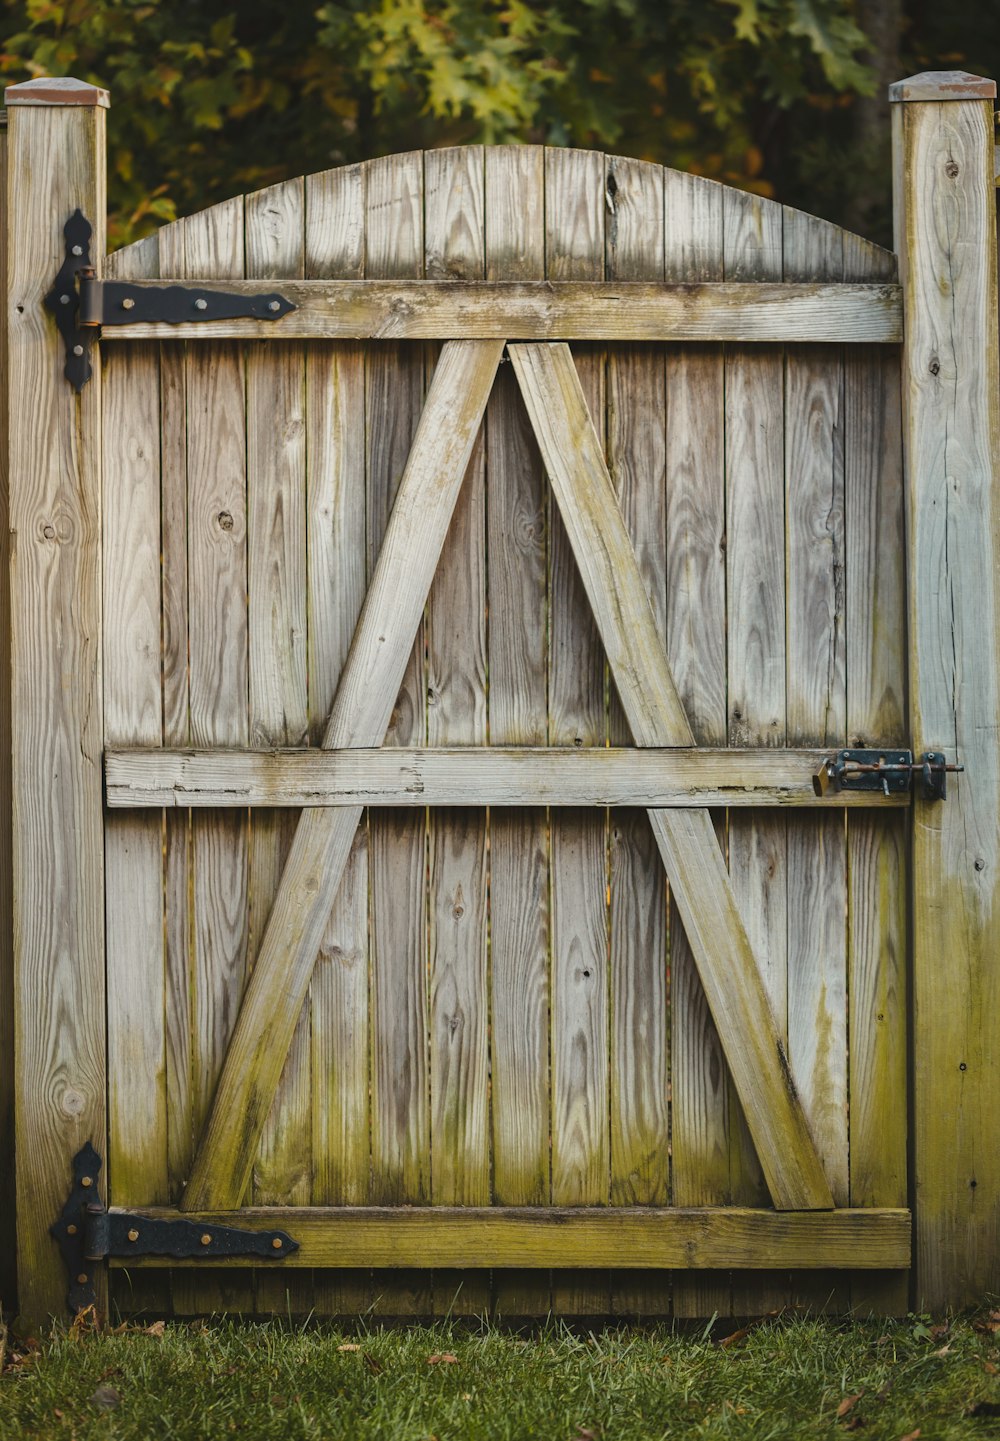 a wooden gate with a metal latch on it